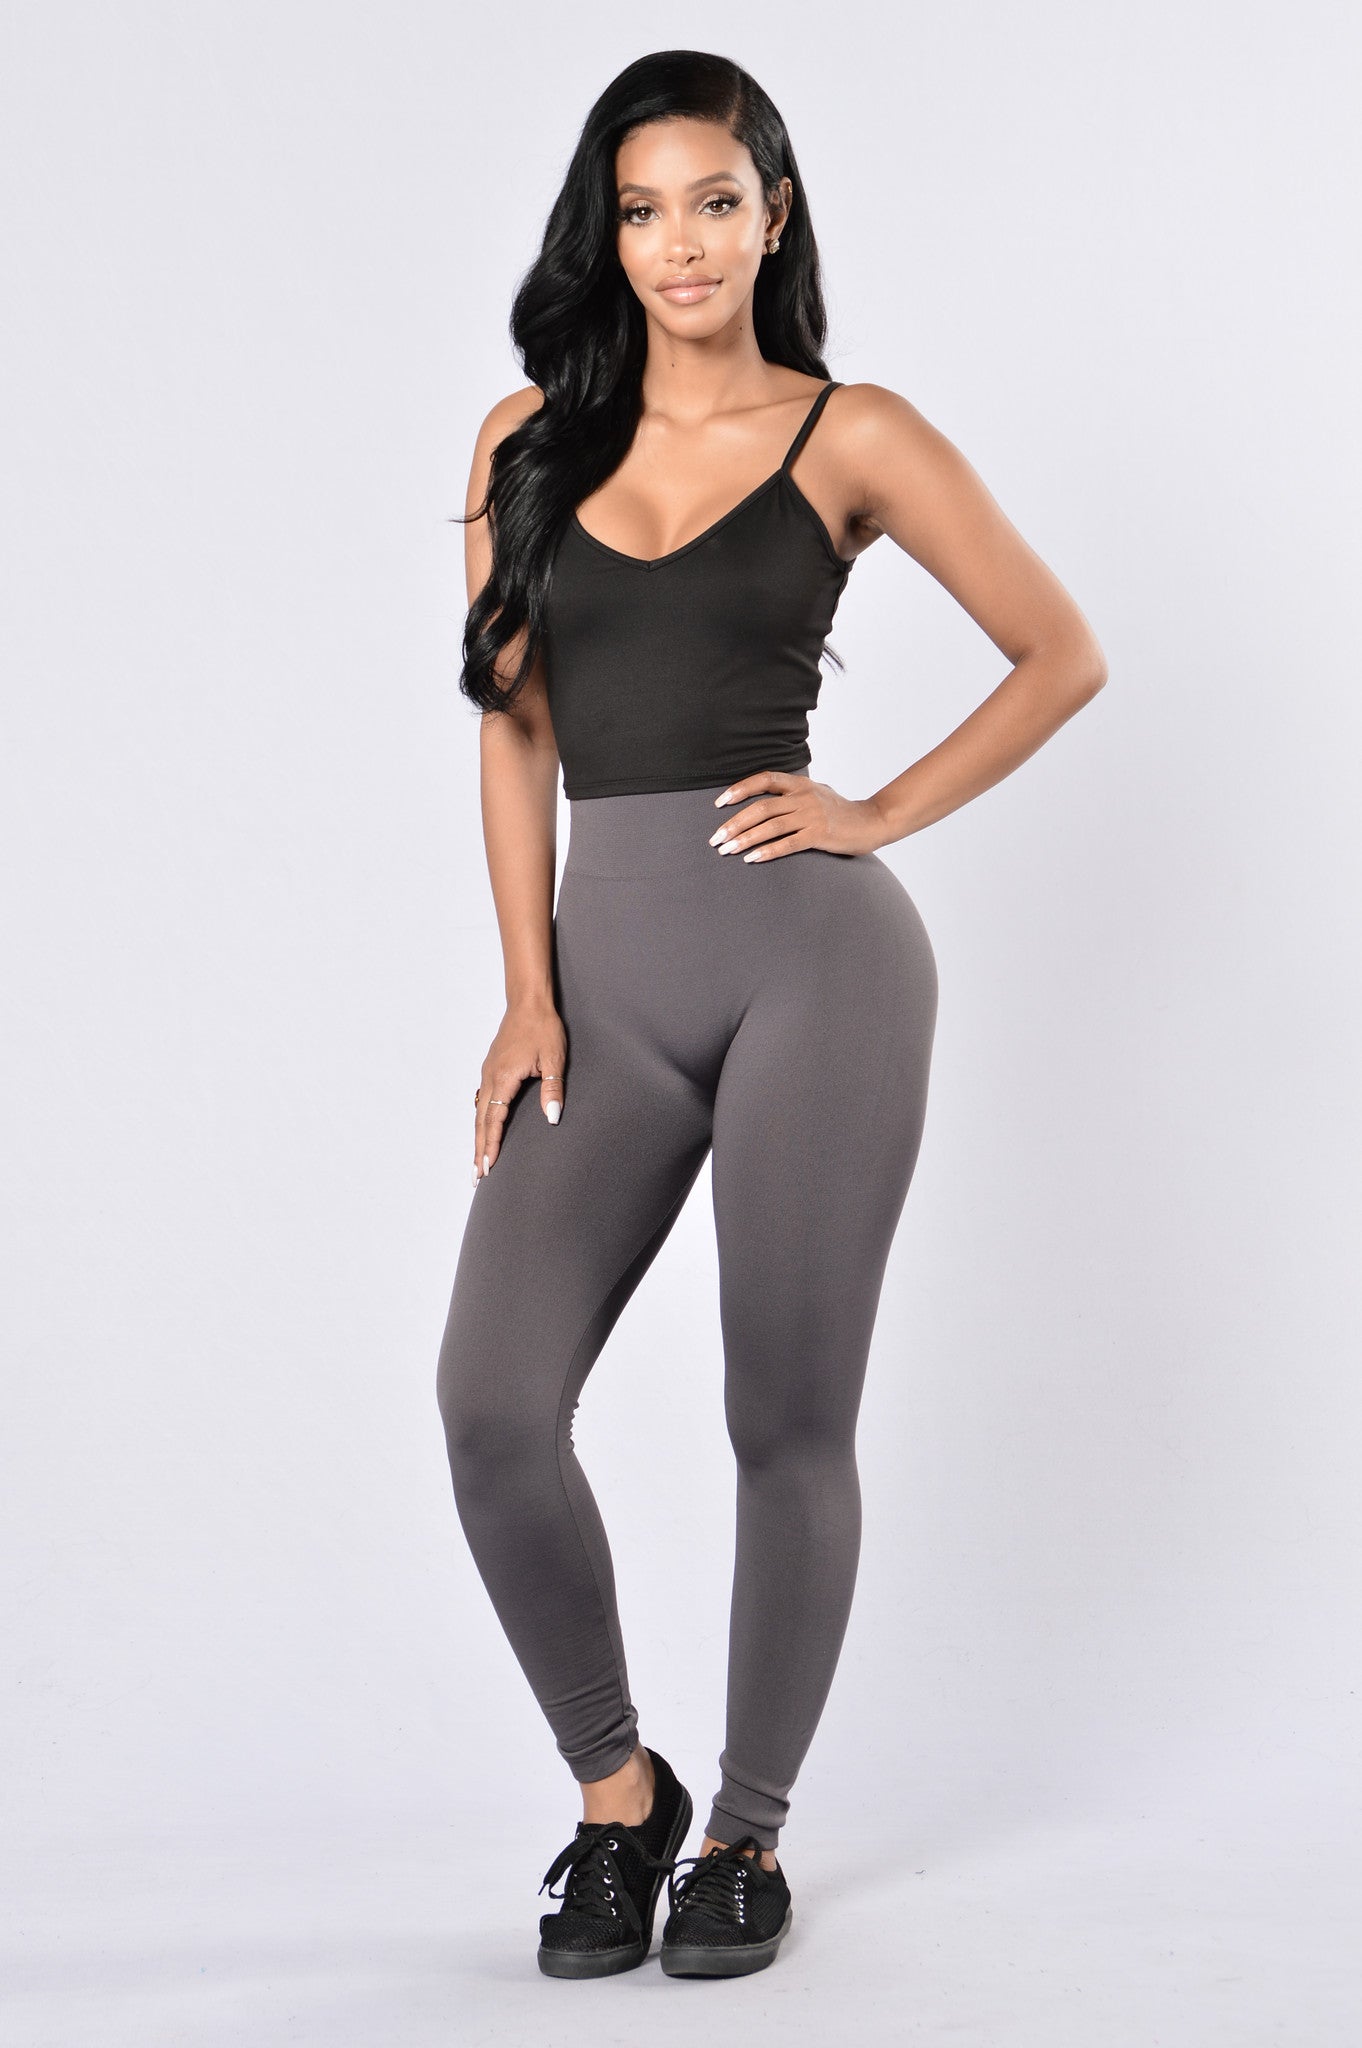 Are Flare Leggings In Style 2022